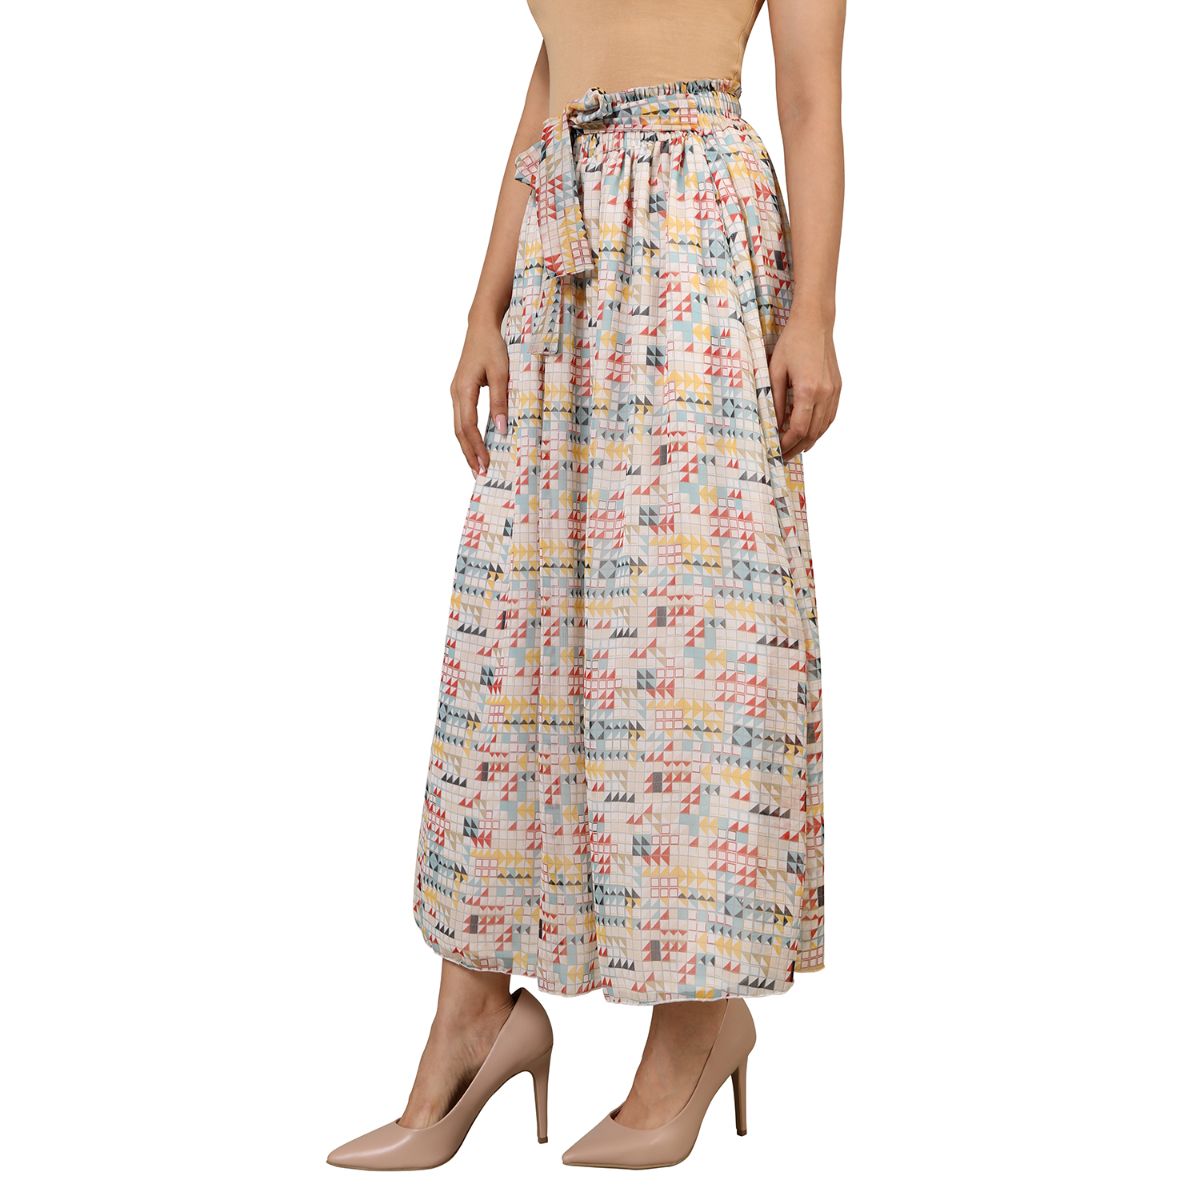 Mantra multicoloured polyester Gather skirt